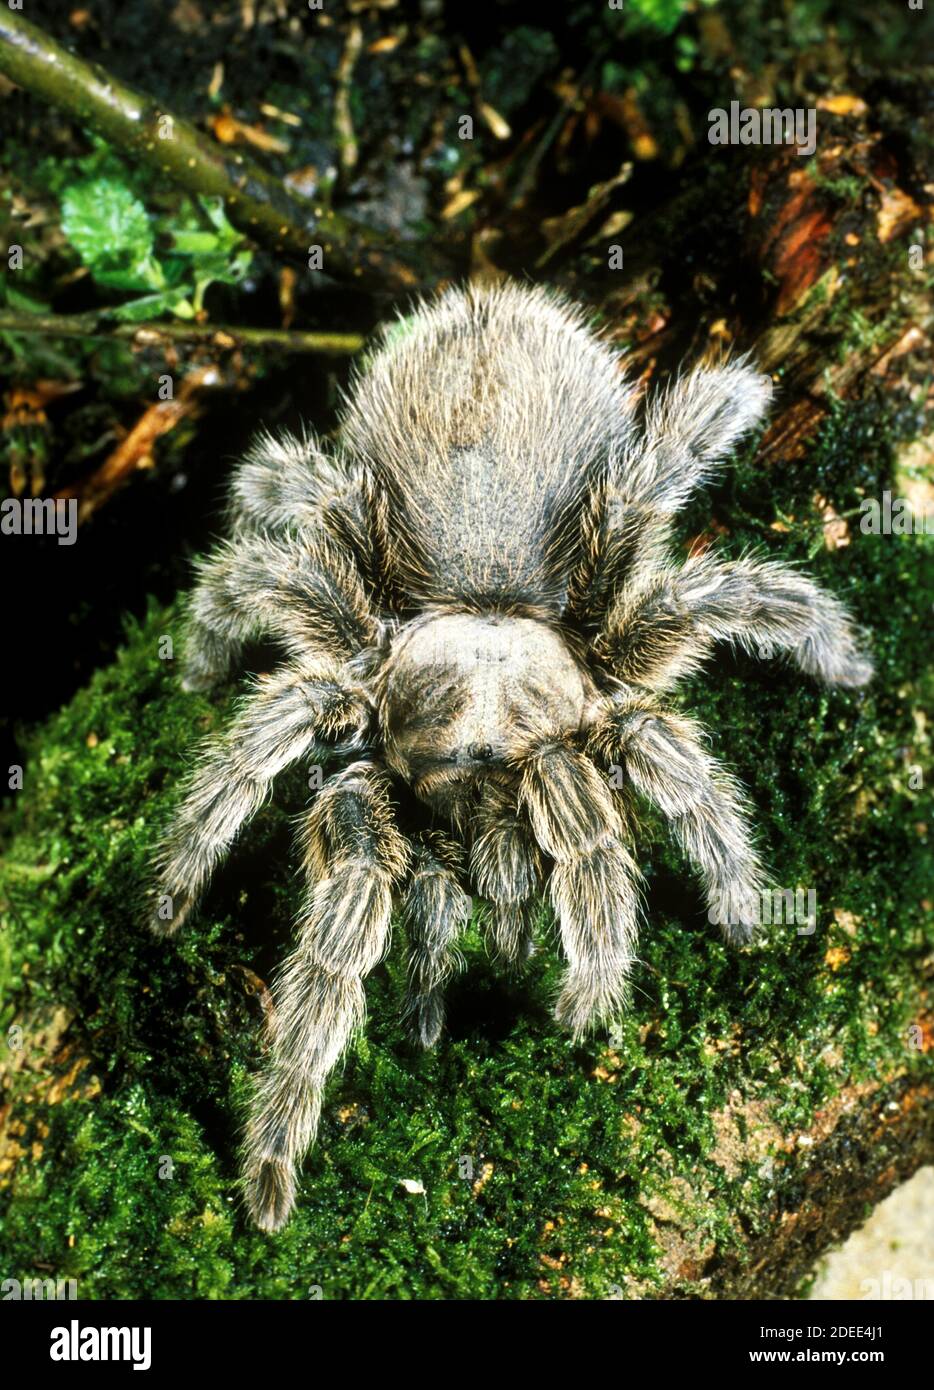 Spider, theraphosa sp, Adult standing on Moss Stock Photo